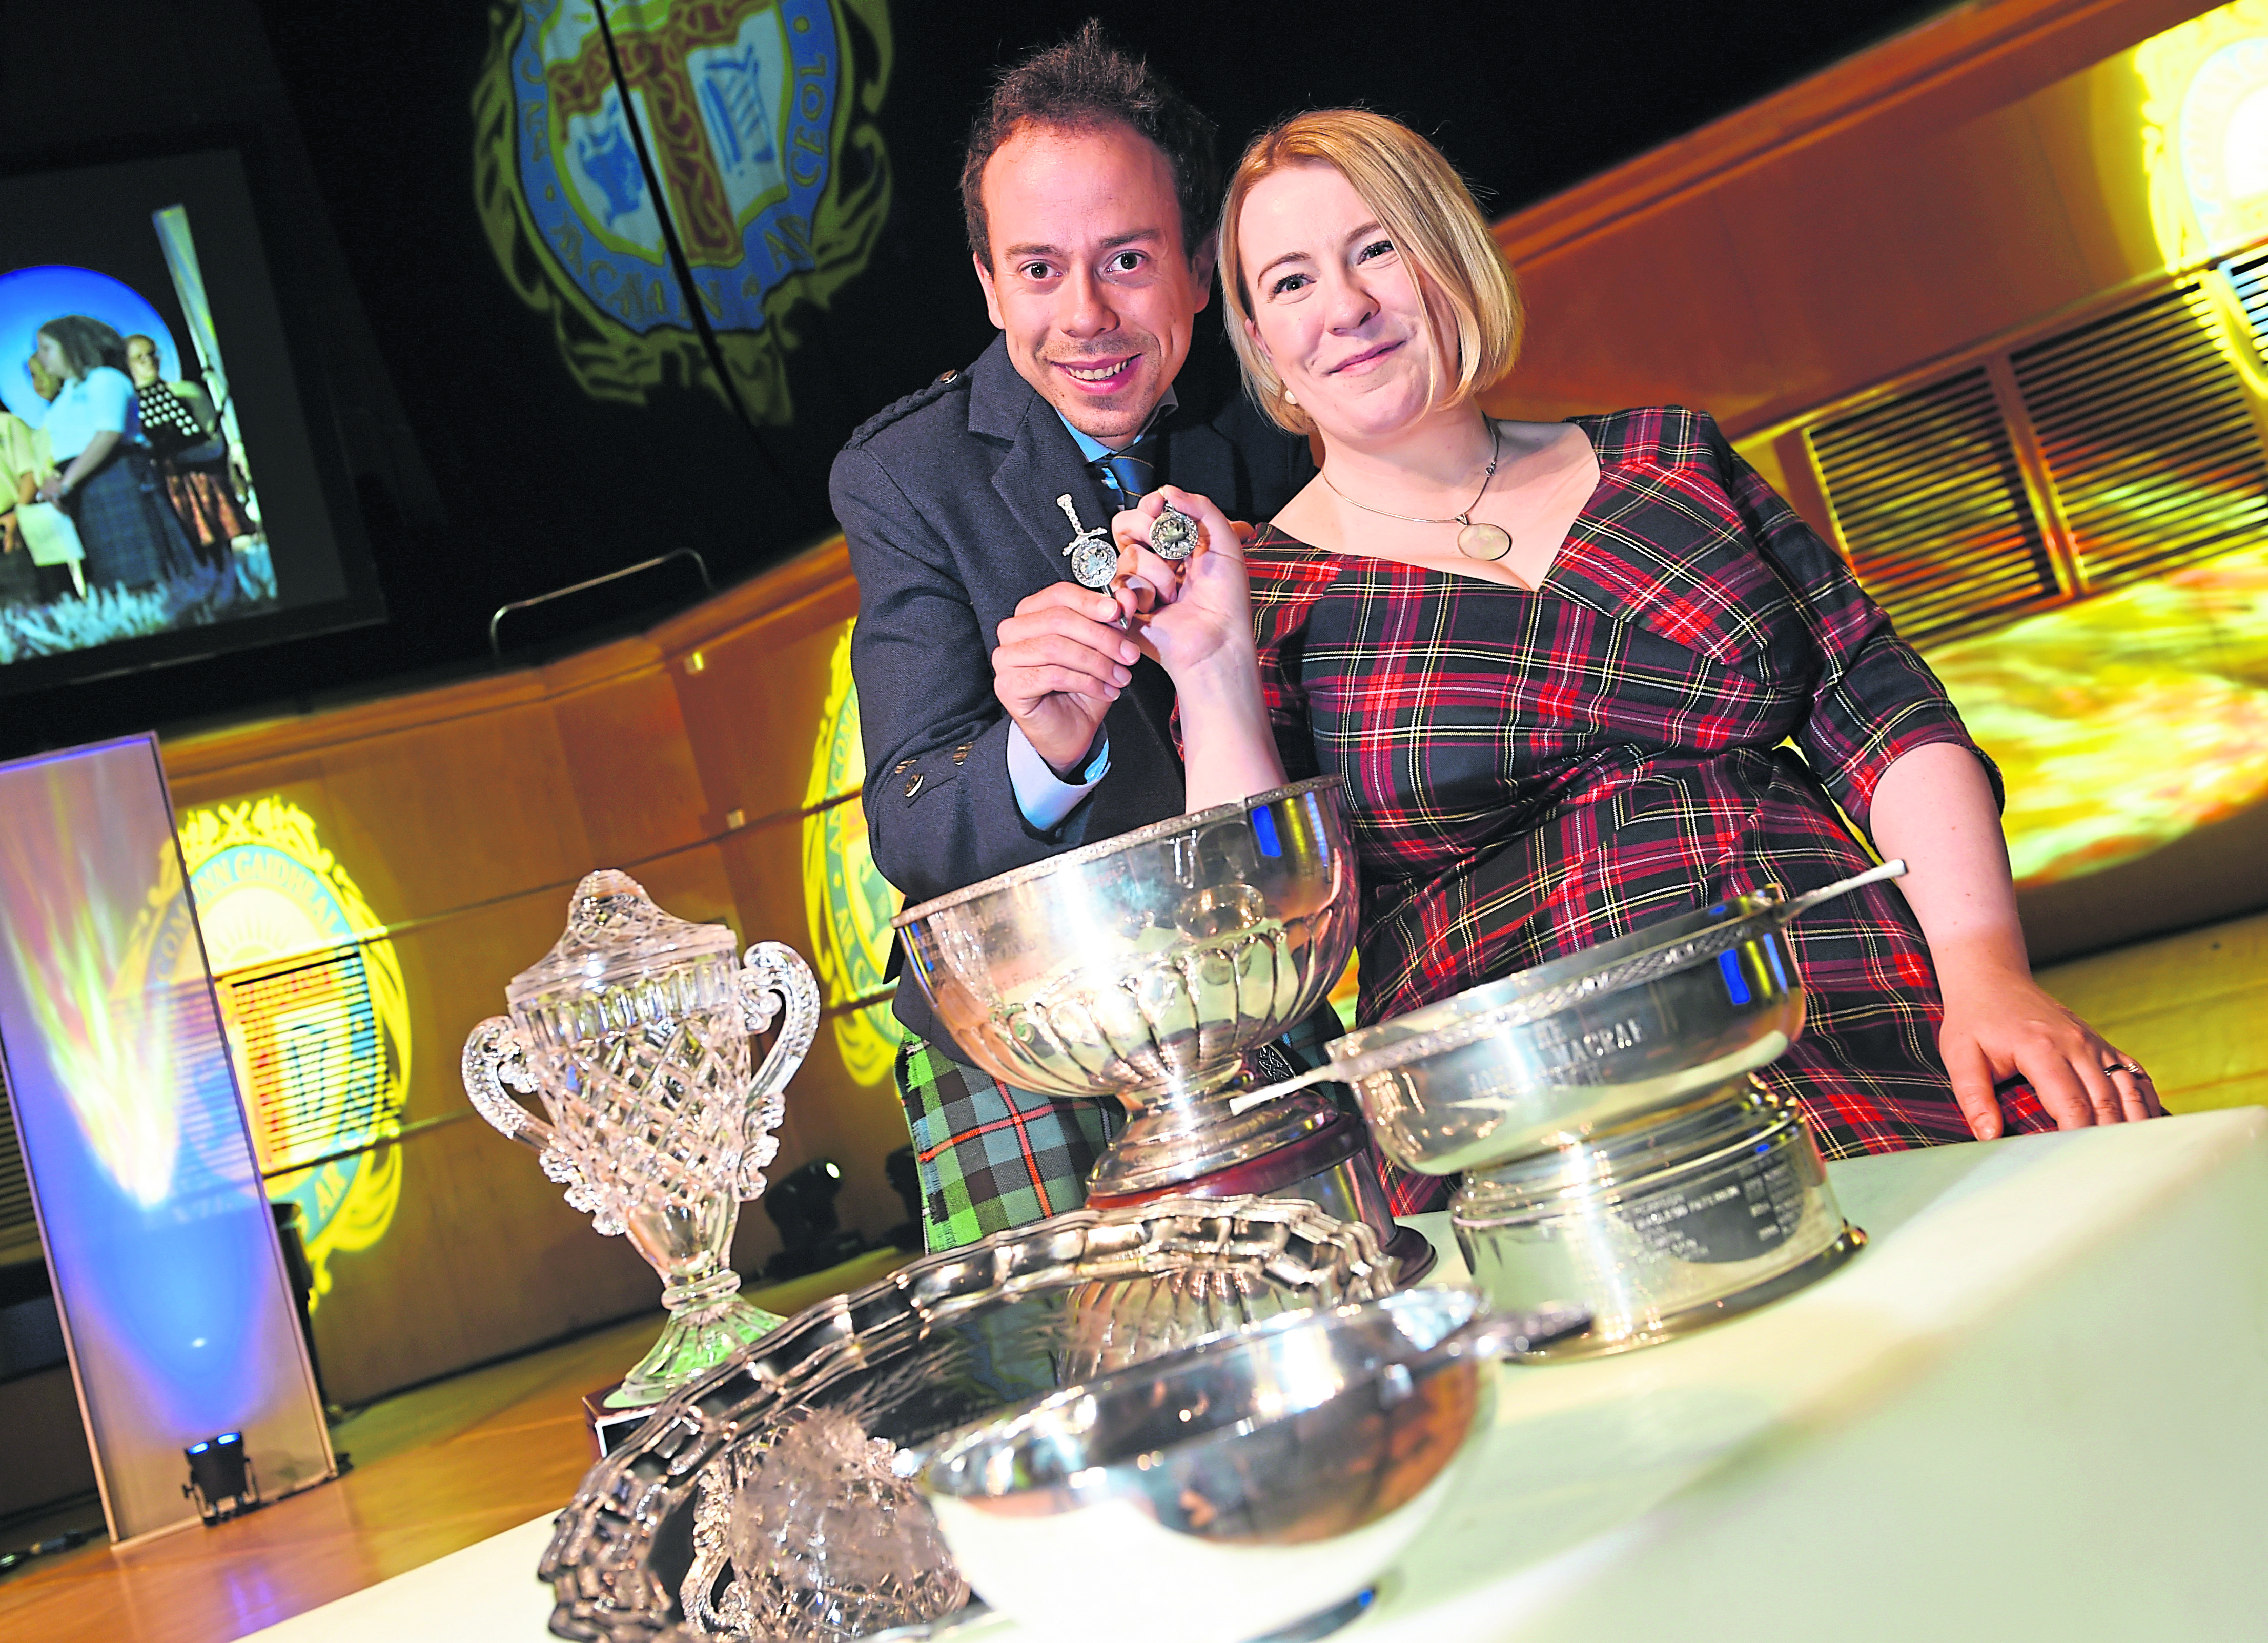 Silver Pendant winners,
Calum MacColl of Fort William and Julie-Anne MacFadyen of Oban with their awards in the Glasgow Royal Concert Hall. Picture by Sandy McCook